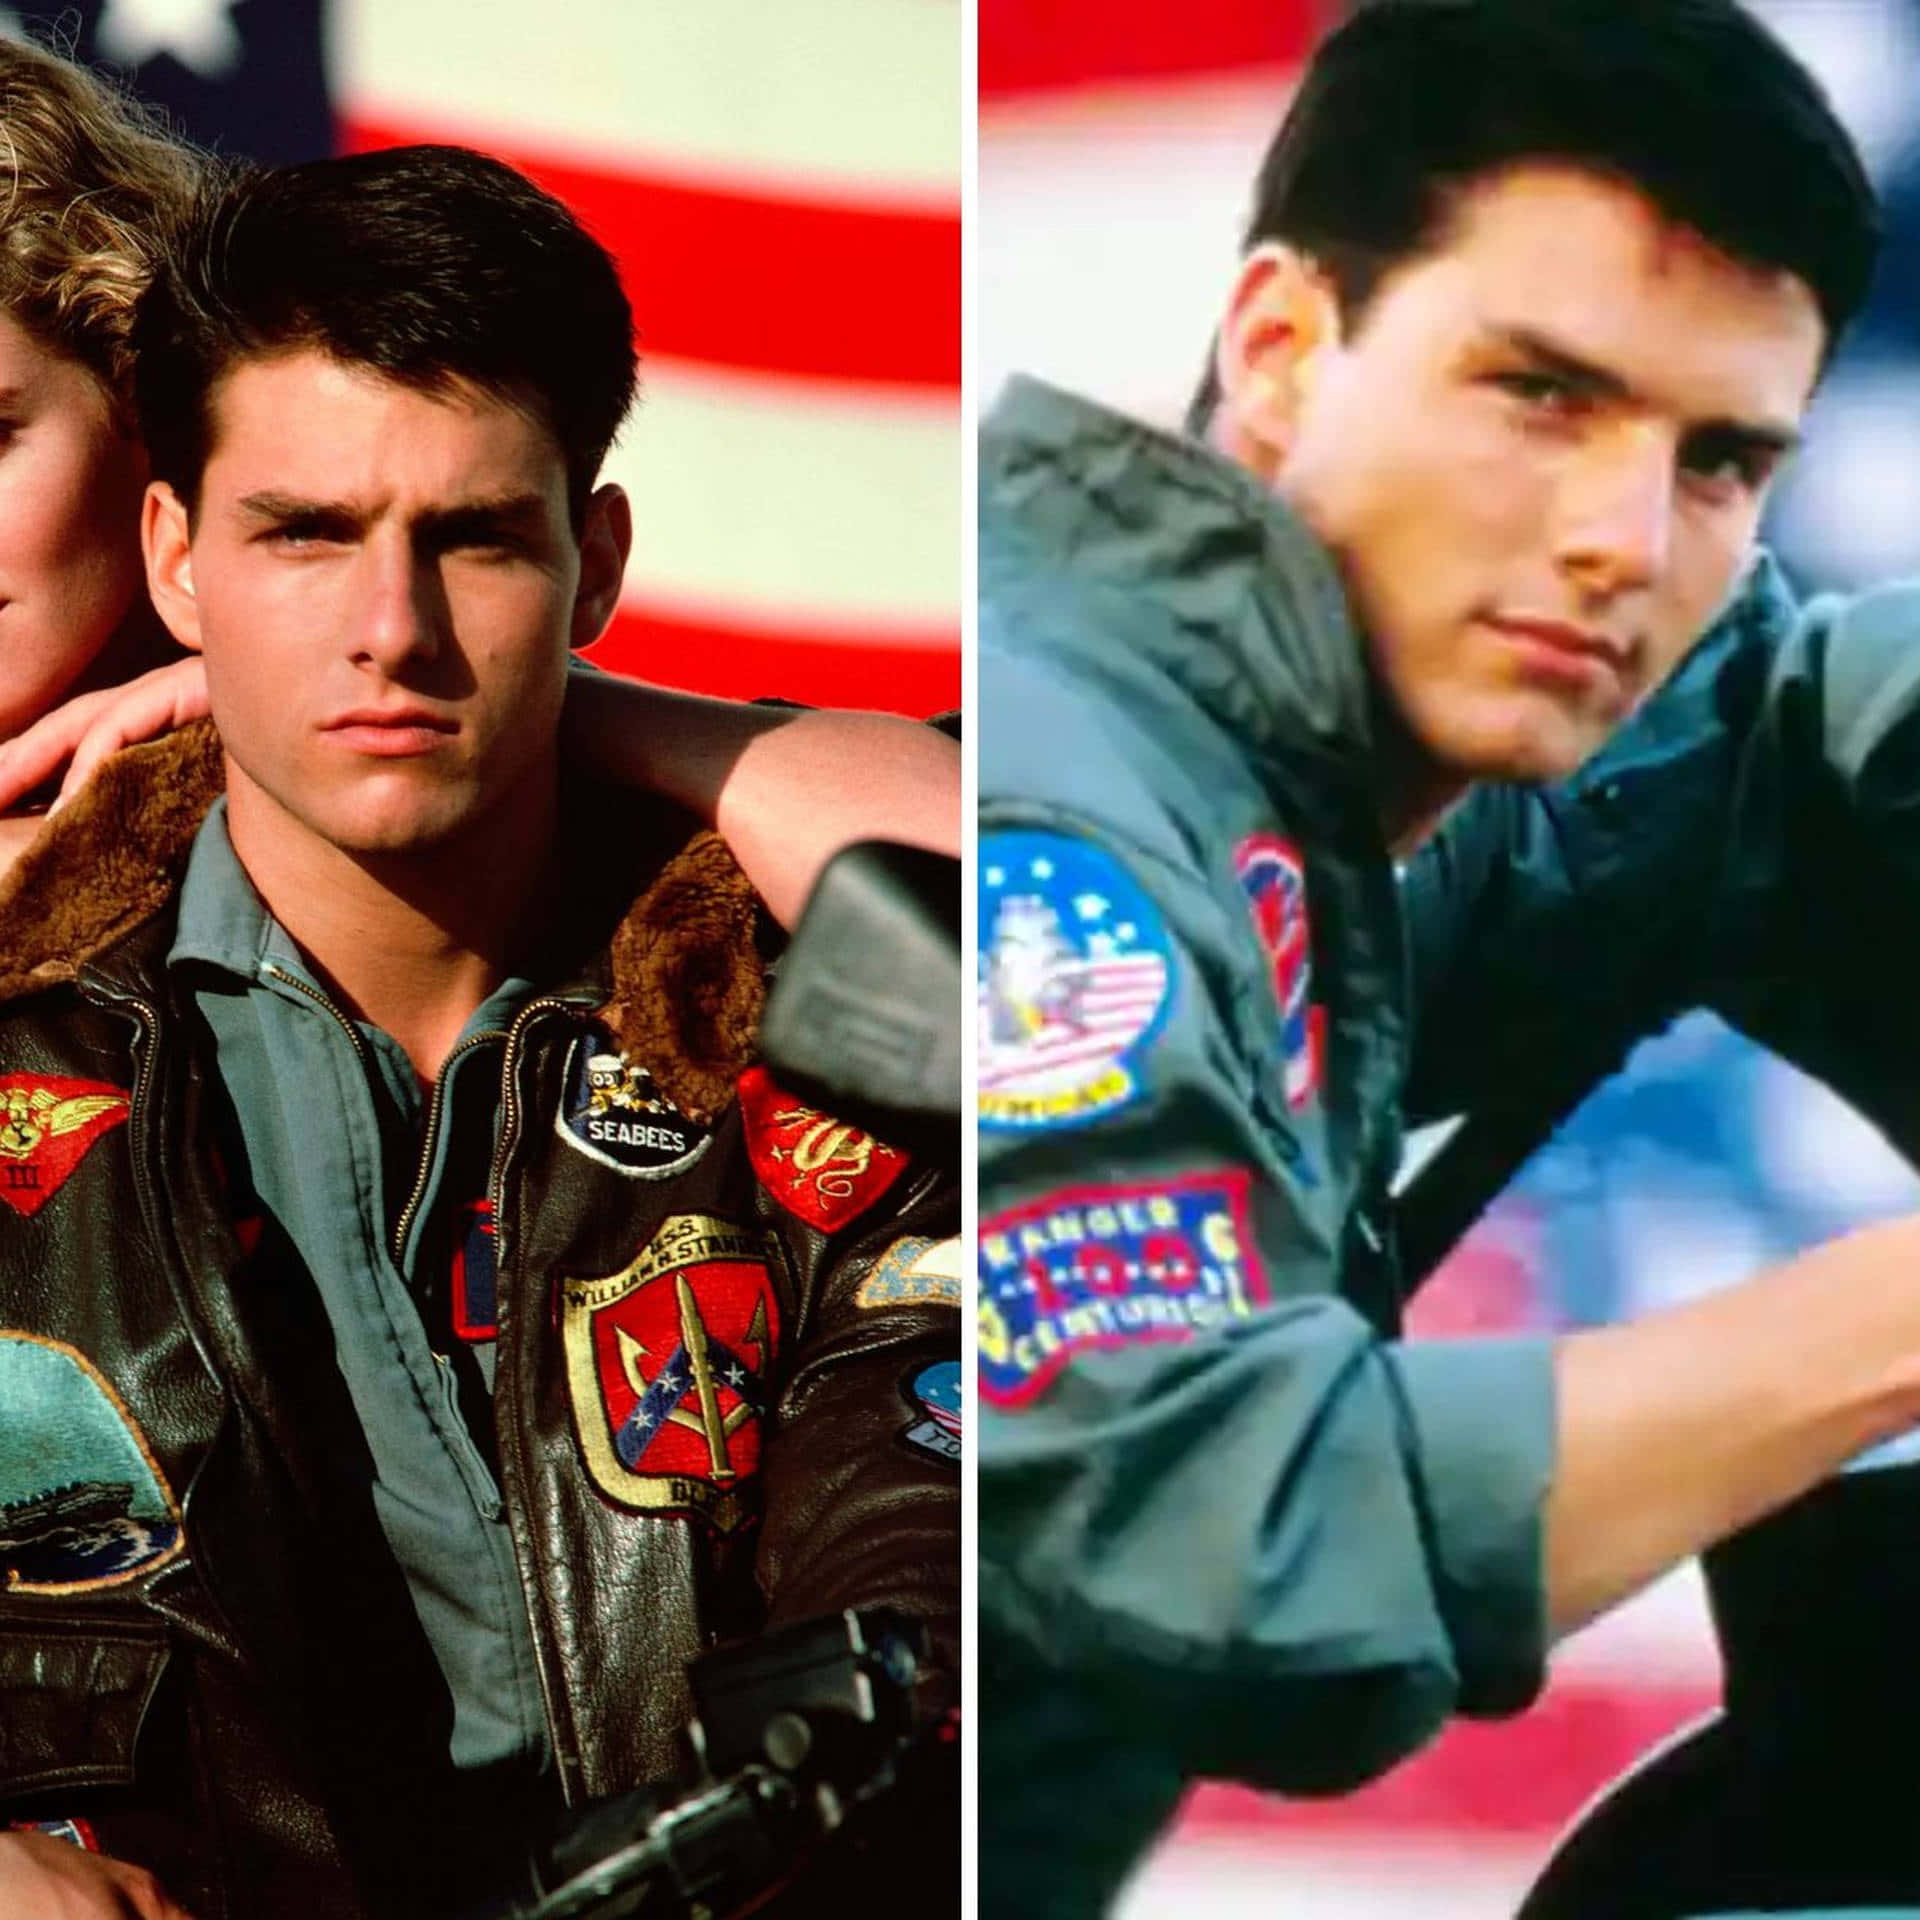 "Feel the need for speed with TOP GUN!"